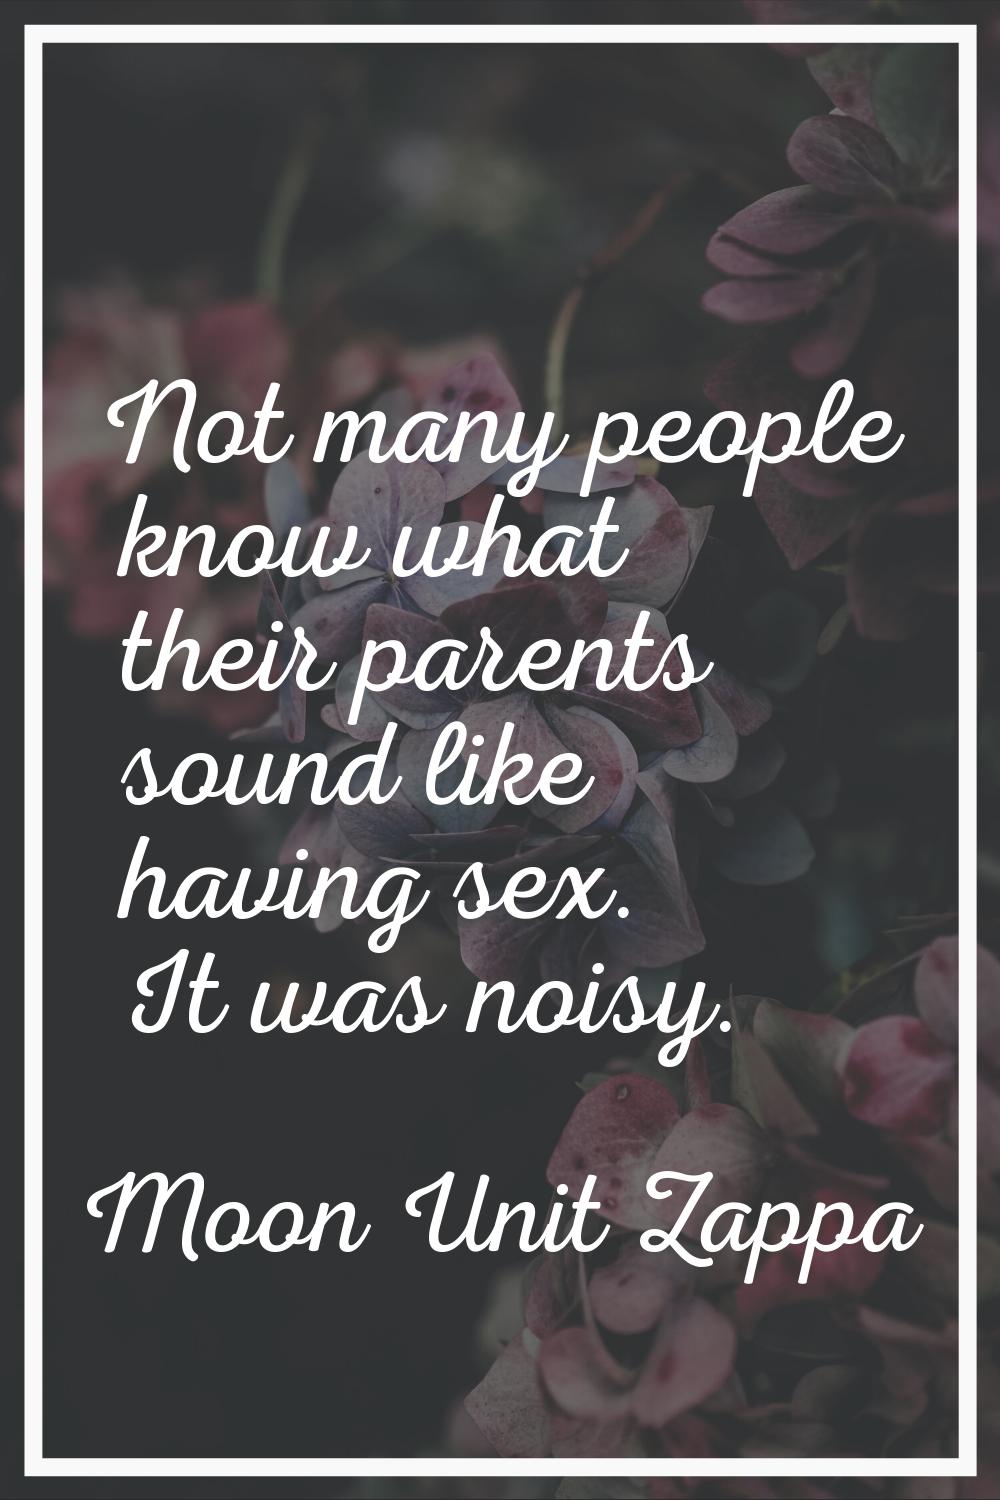 Not many people know what their parents sound like having sex. It was noisy.